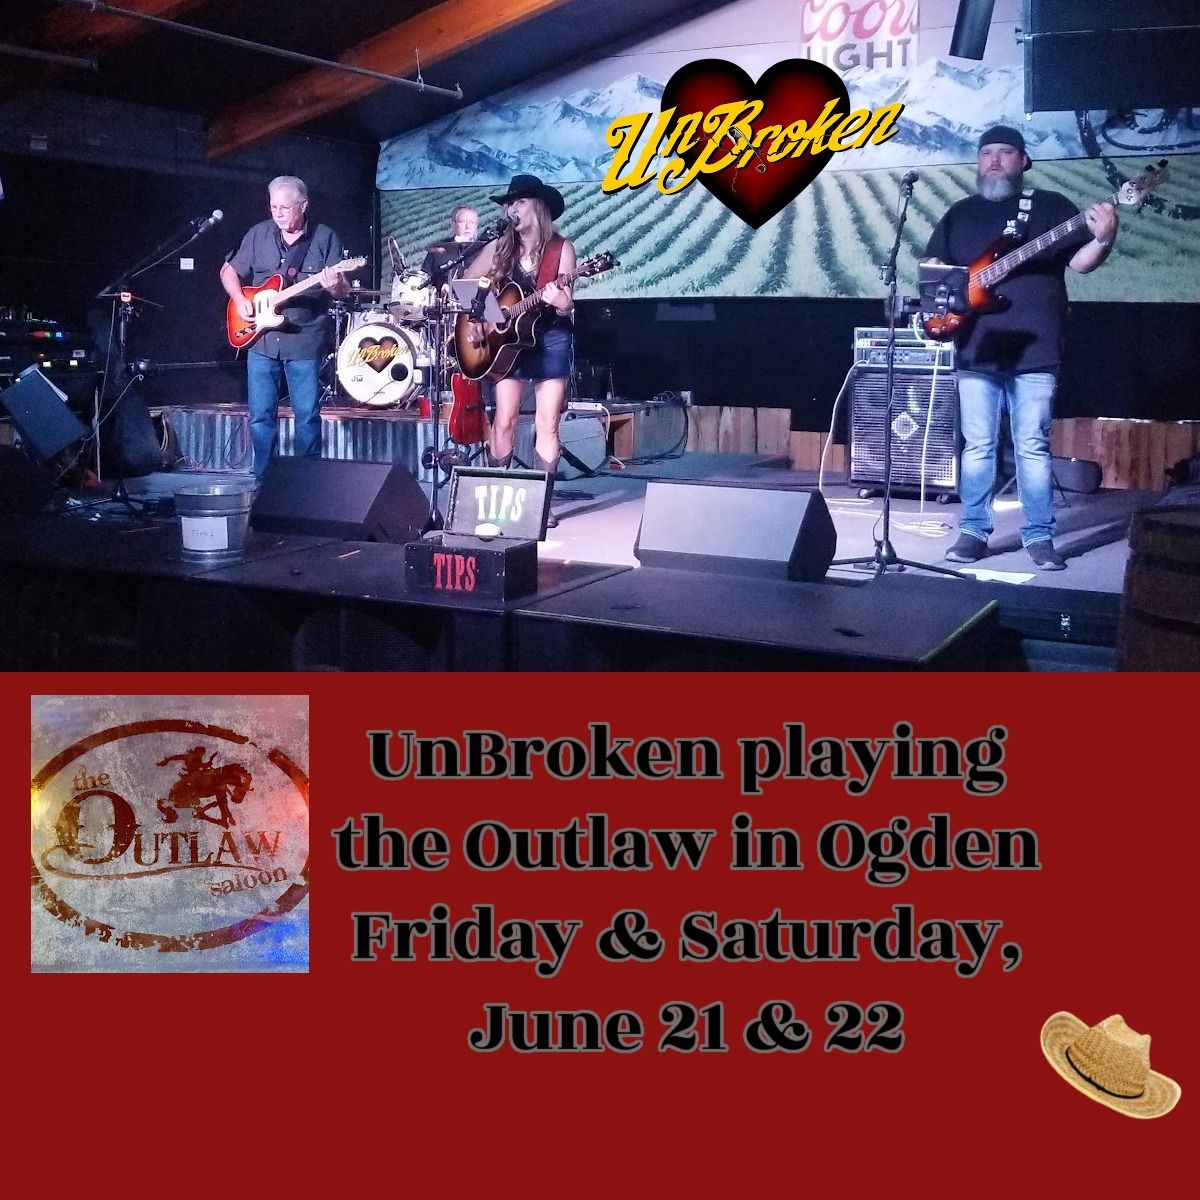 UnBroken playing the Outlaw Saloon Friday & Saturday June 21 & 22